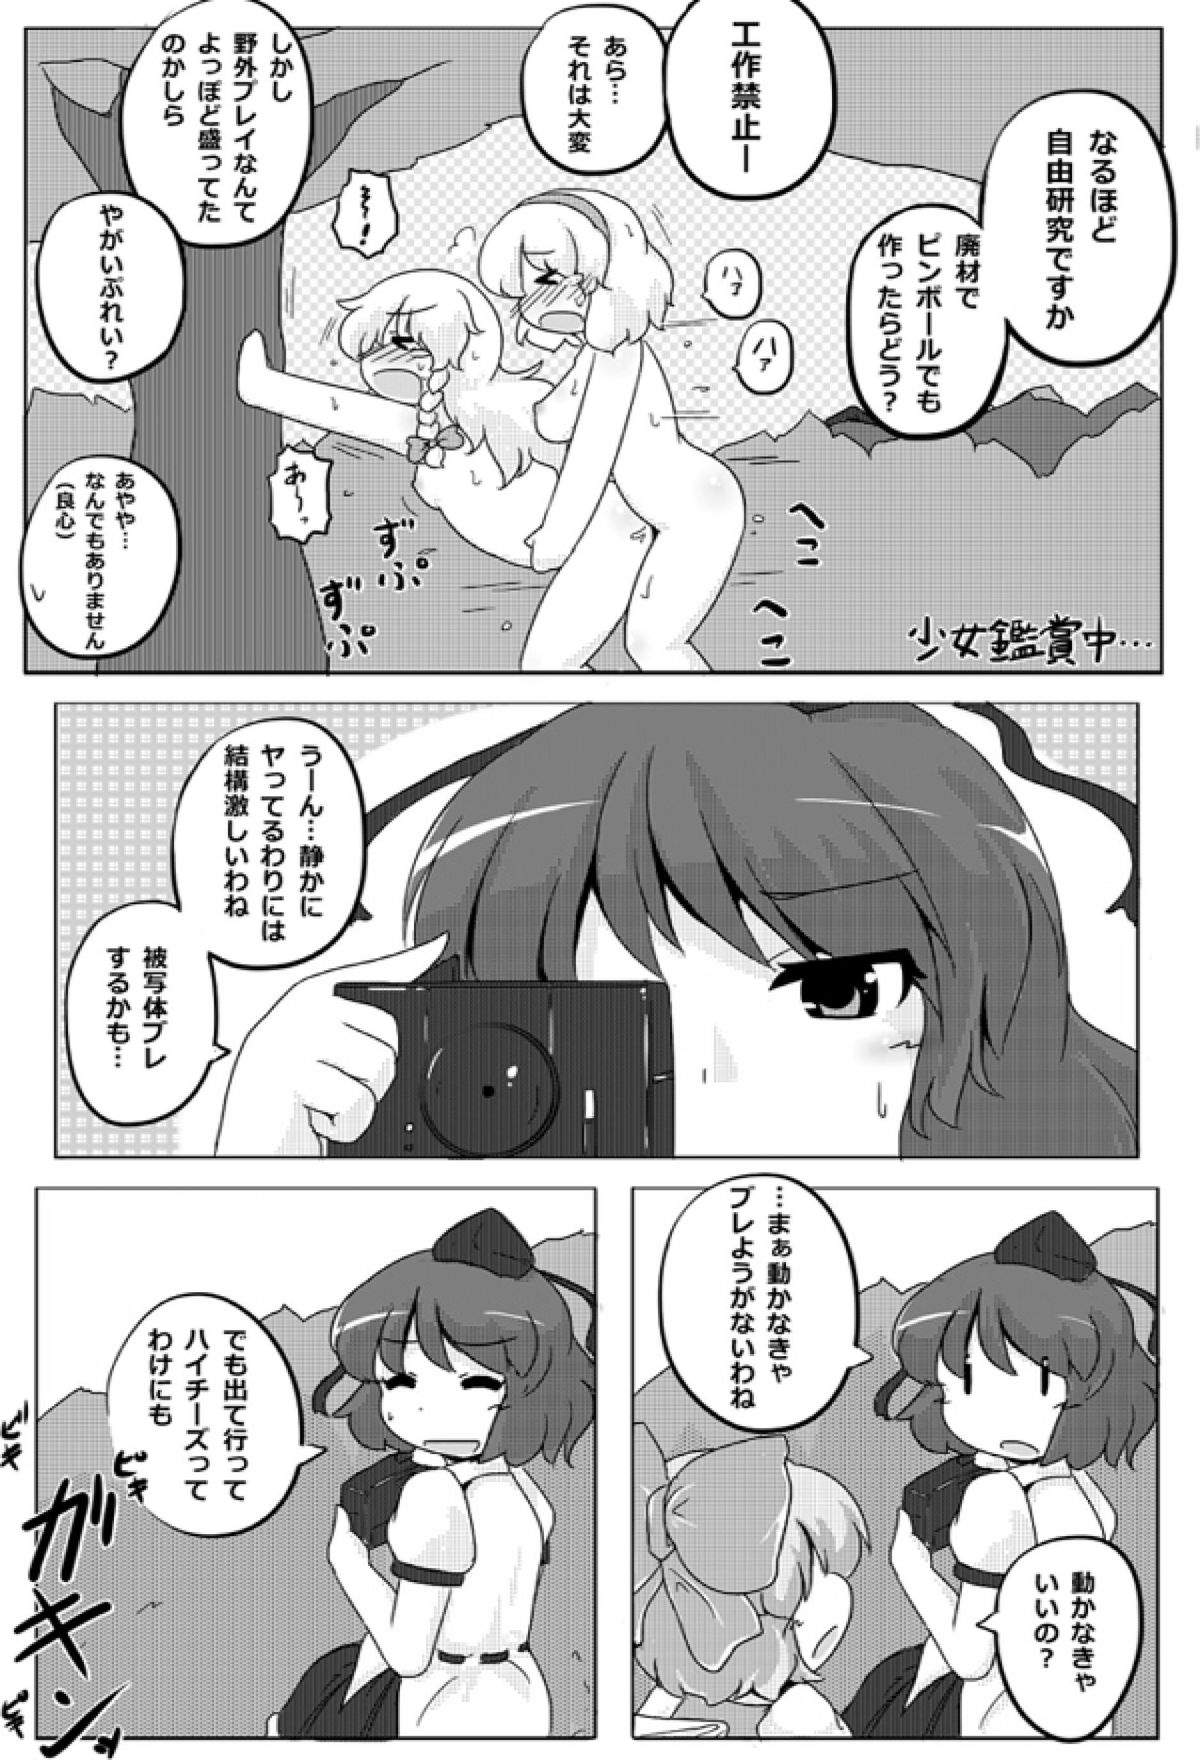 [GOLD LEAF (Sukedai)] Cirno Spoiler (Touhou Project) [Digital] page 7 full